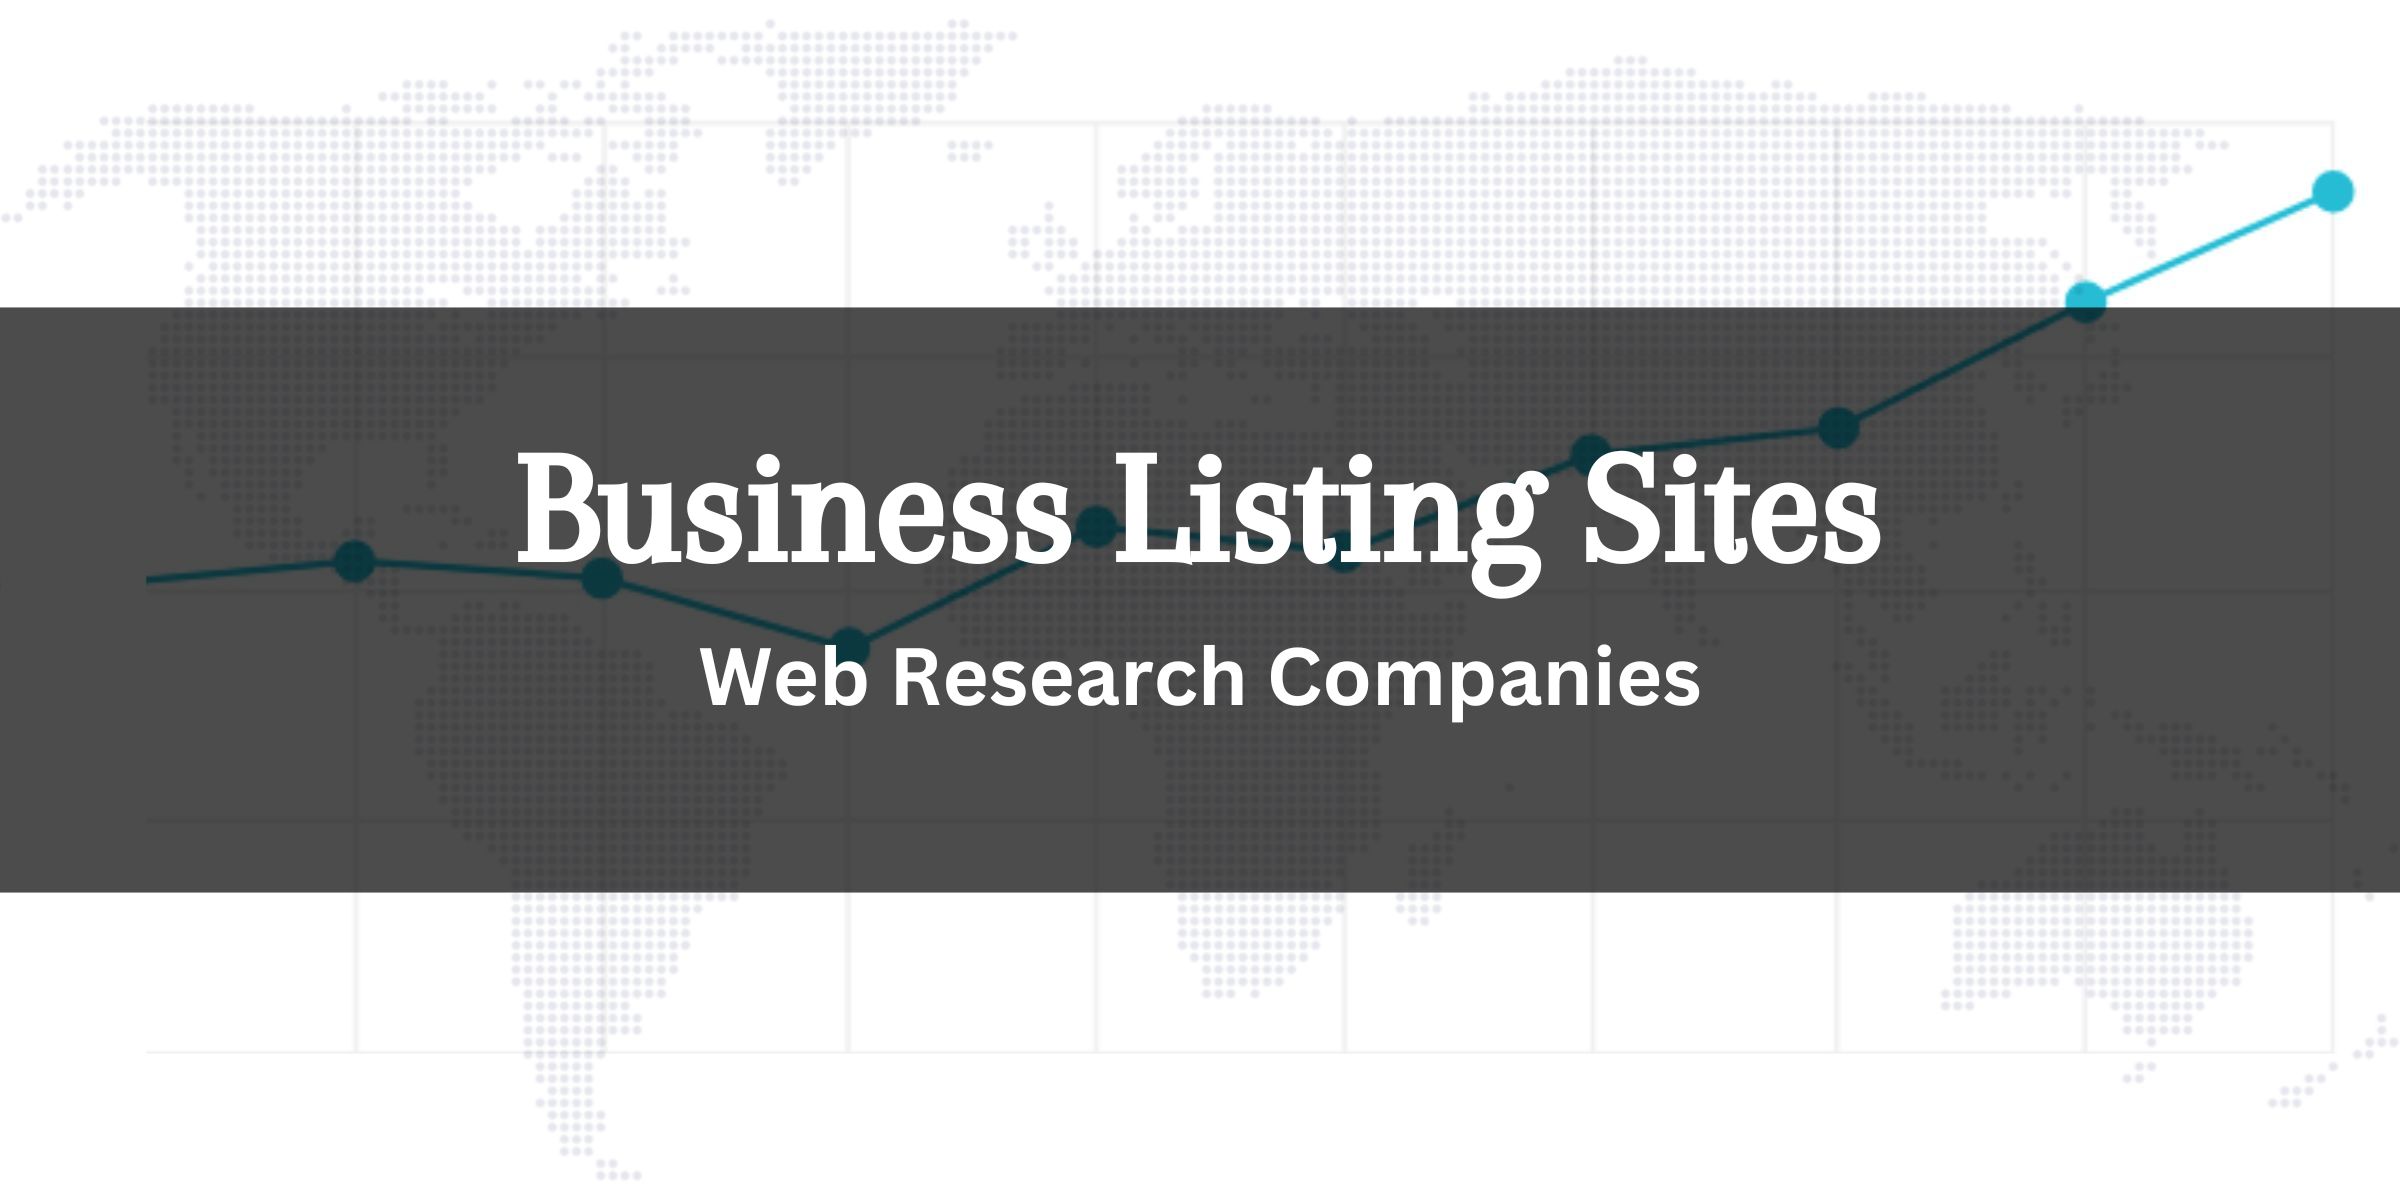 Top Business Listing Sites for Web Research Companies